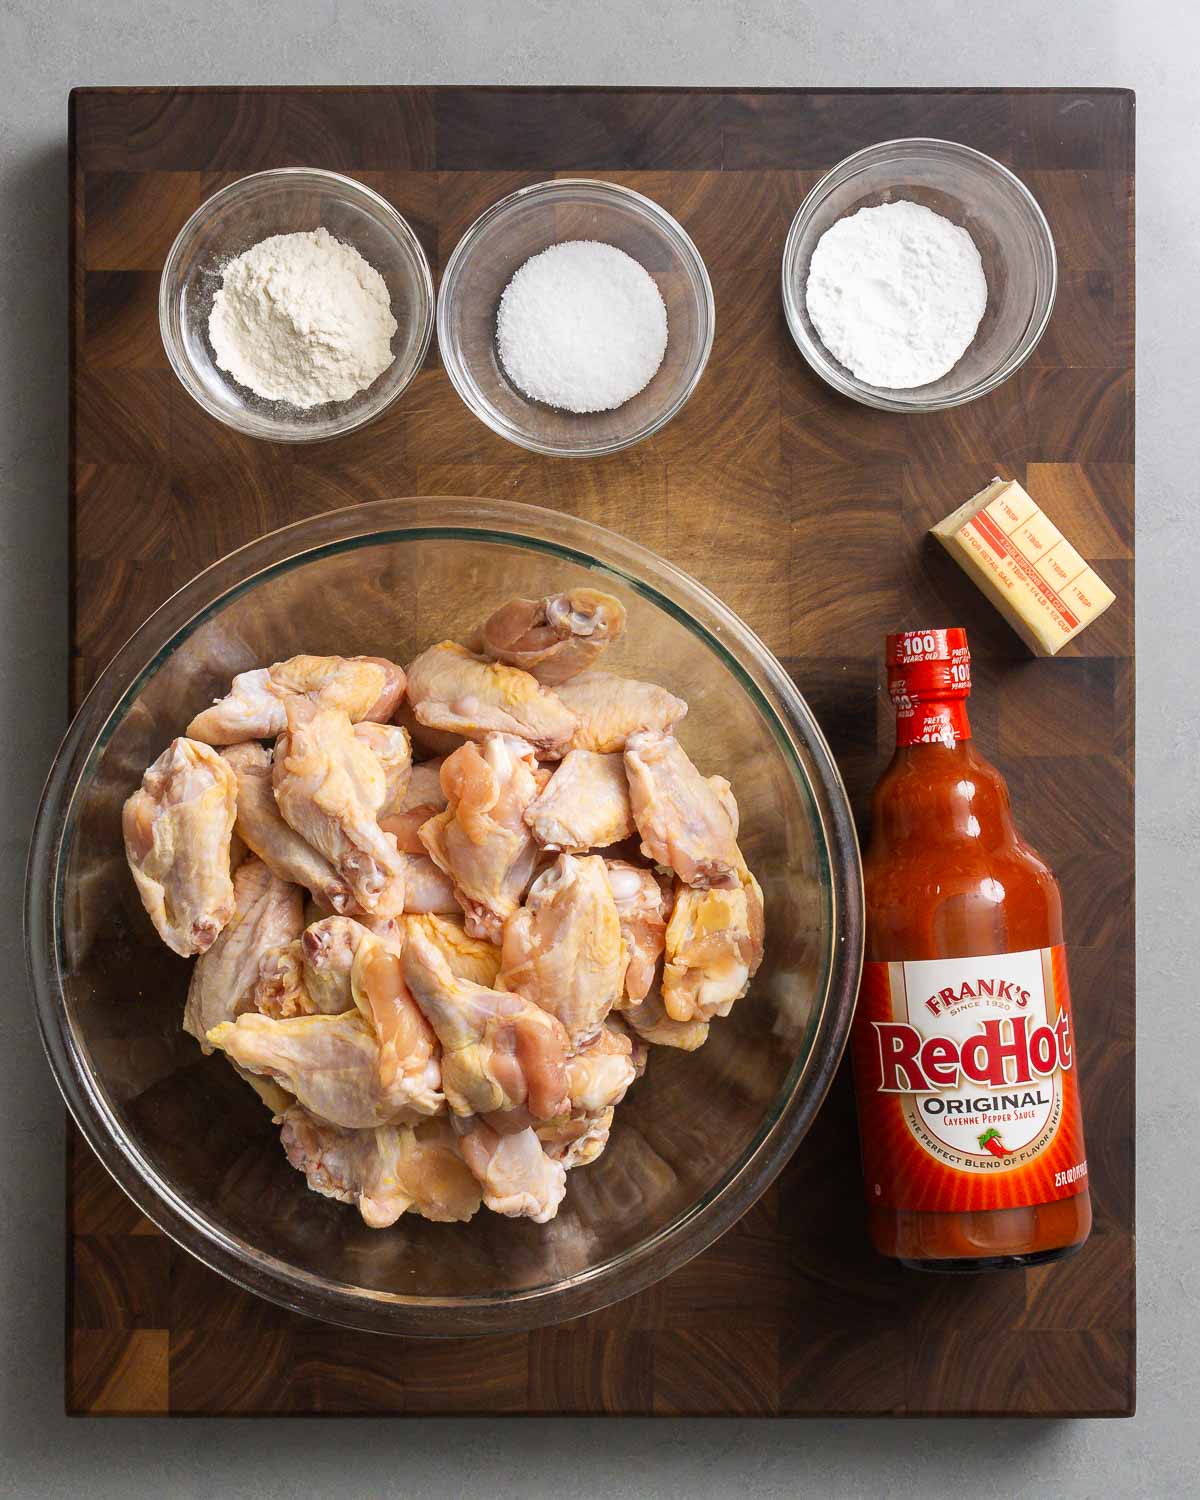 Ingredients shown: flour, Diamond crystal kosher salt, baking powder, butter, party wings, and Frank's red hot sauce.